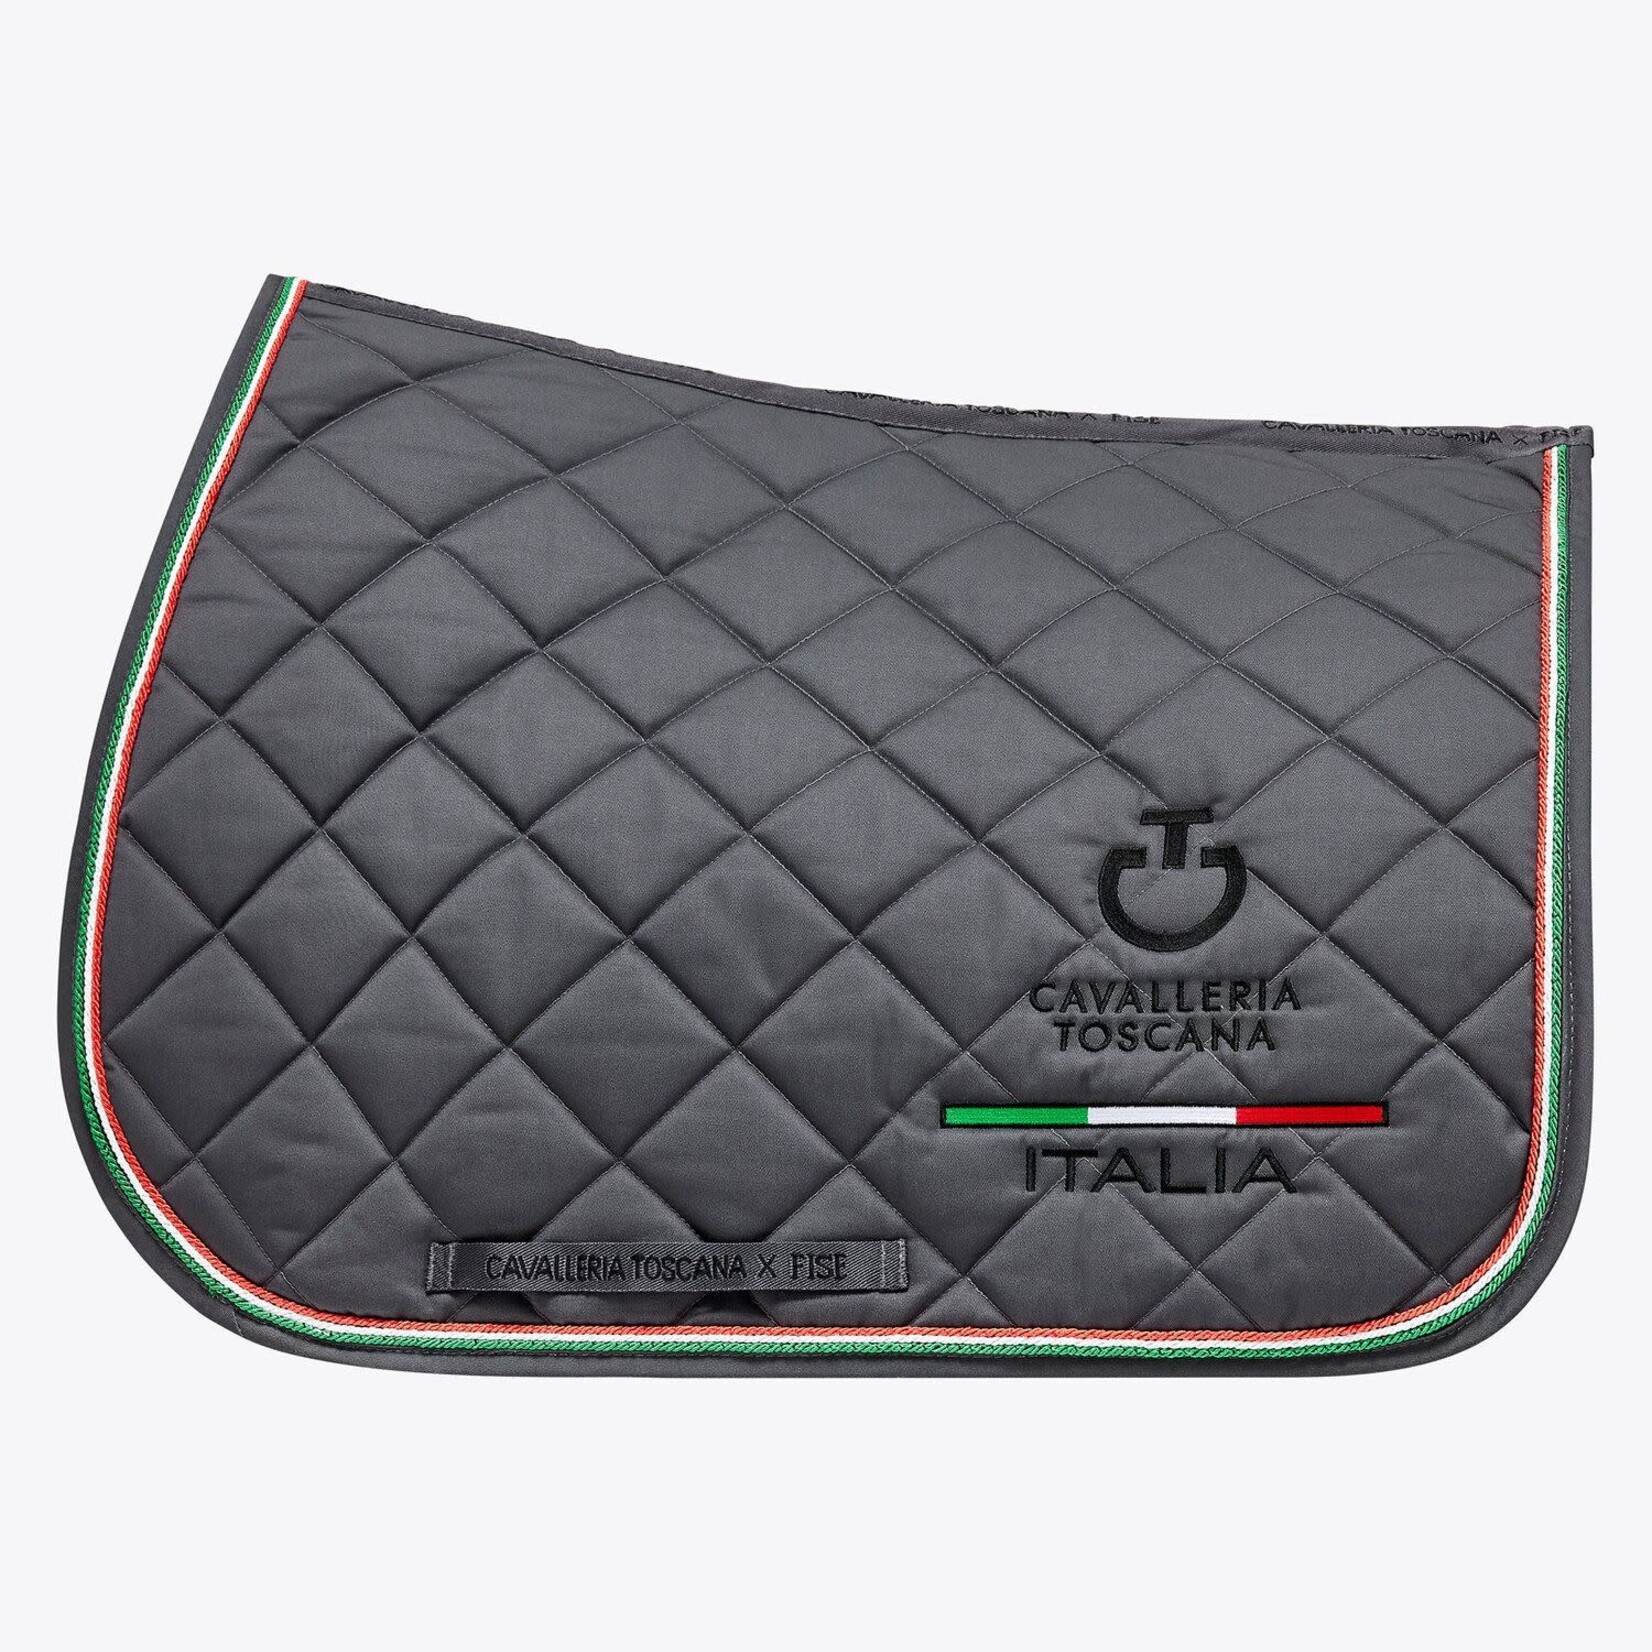 Cavalleria Toscana x fise sottosella jumping saddle pad - Equestrian Style  Exclusive Equestrian Brands